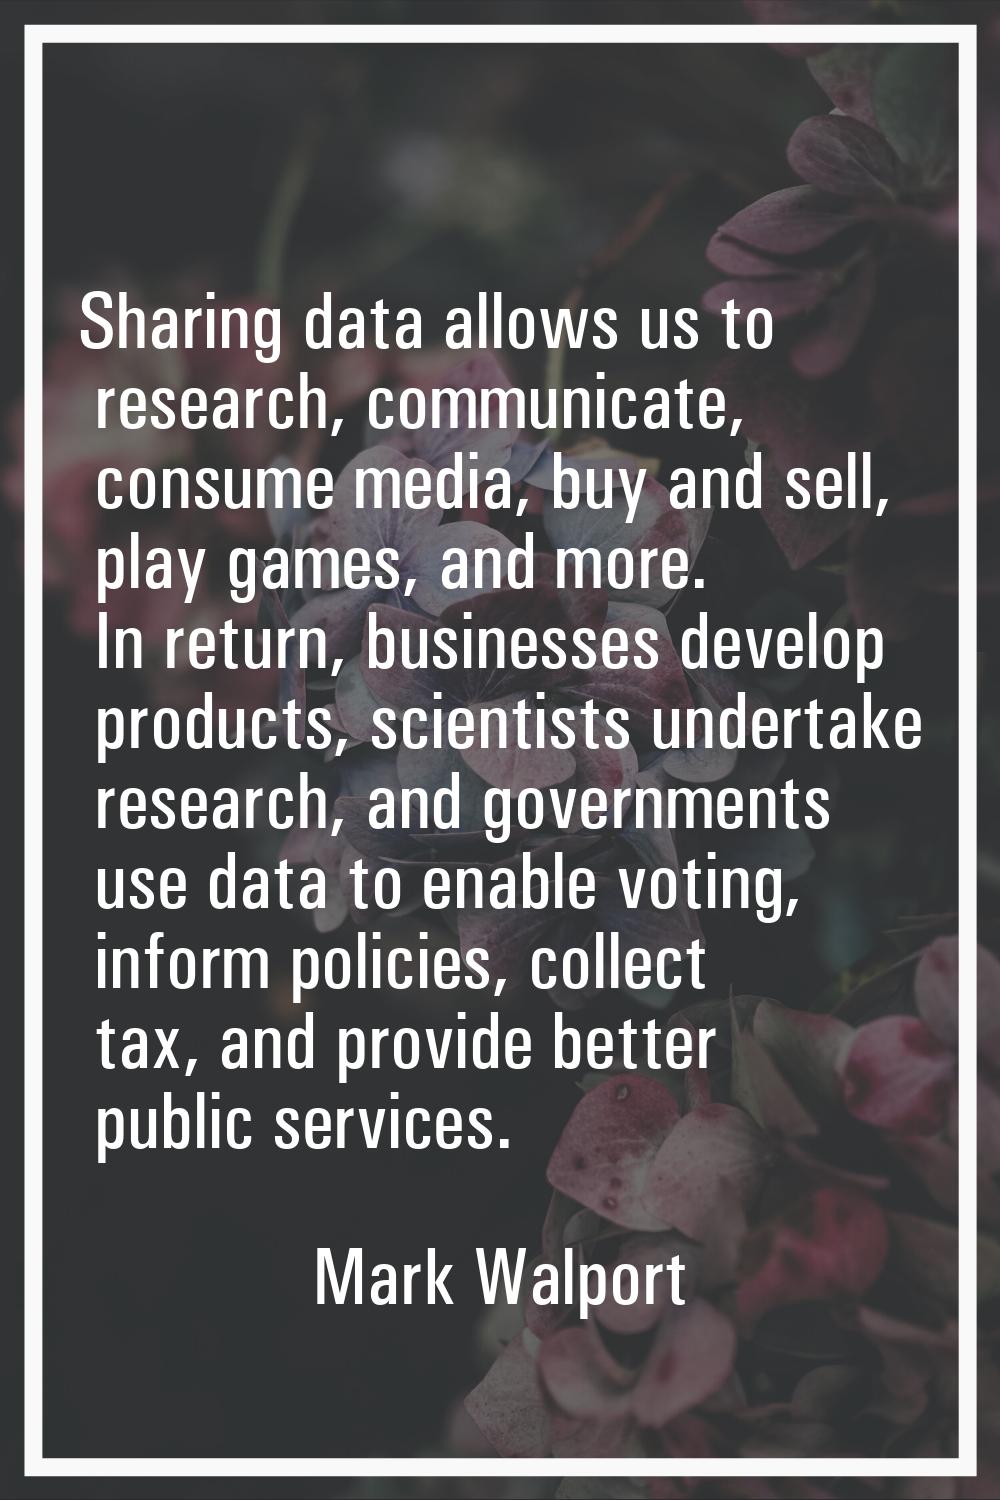 Sharing data allows us to research, communicate, consume media, buy and sell, play games, and more.